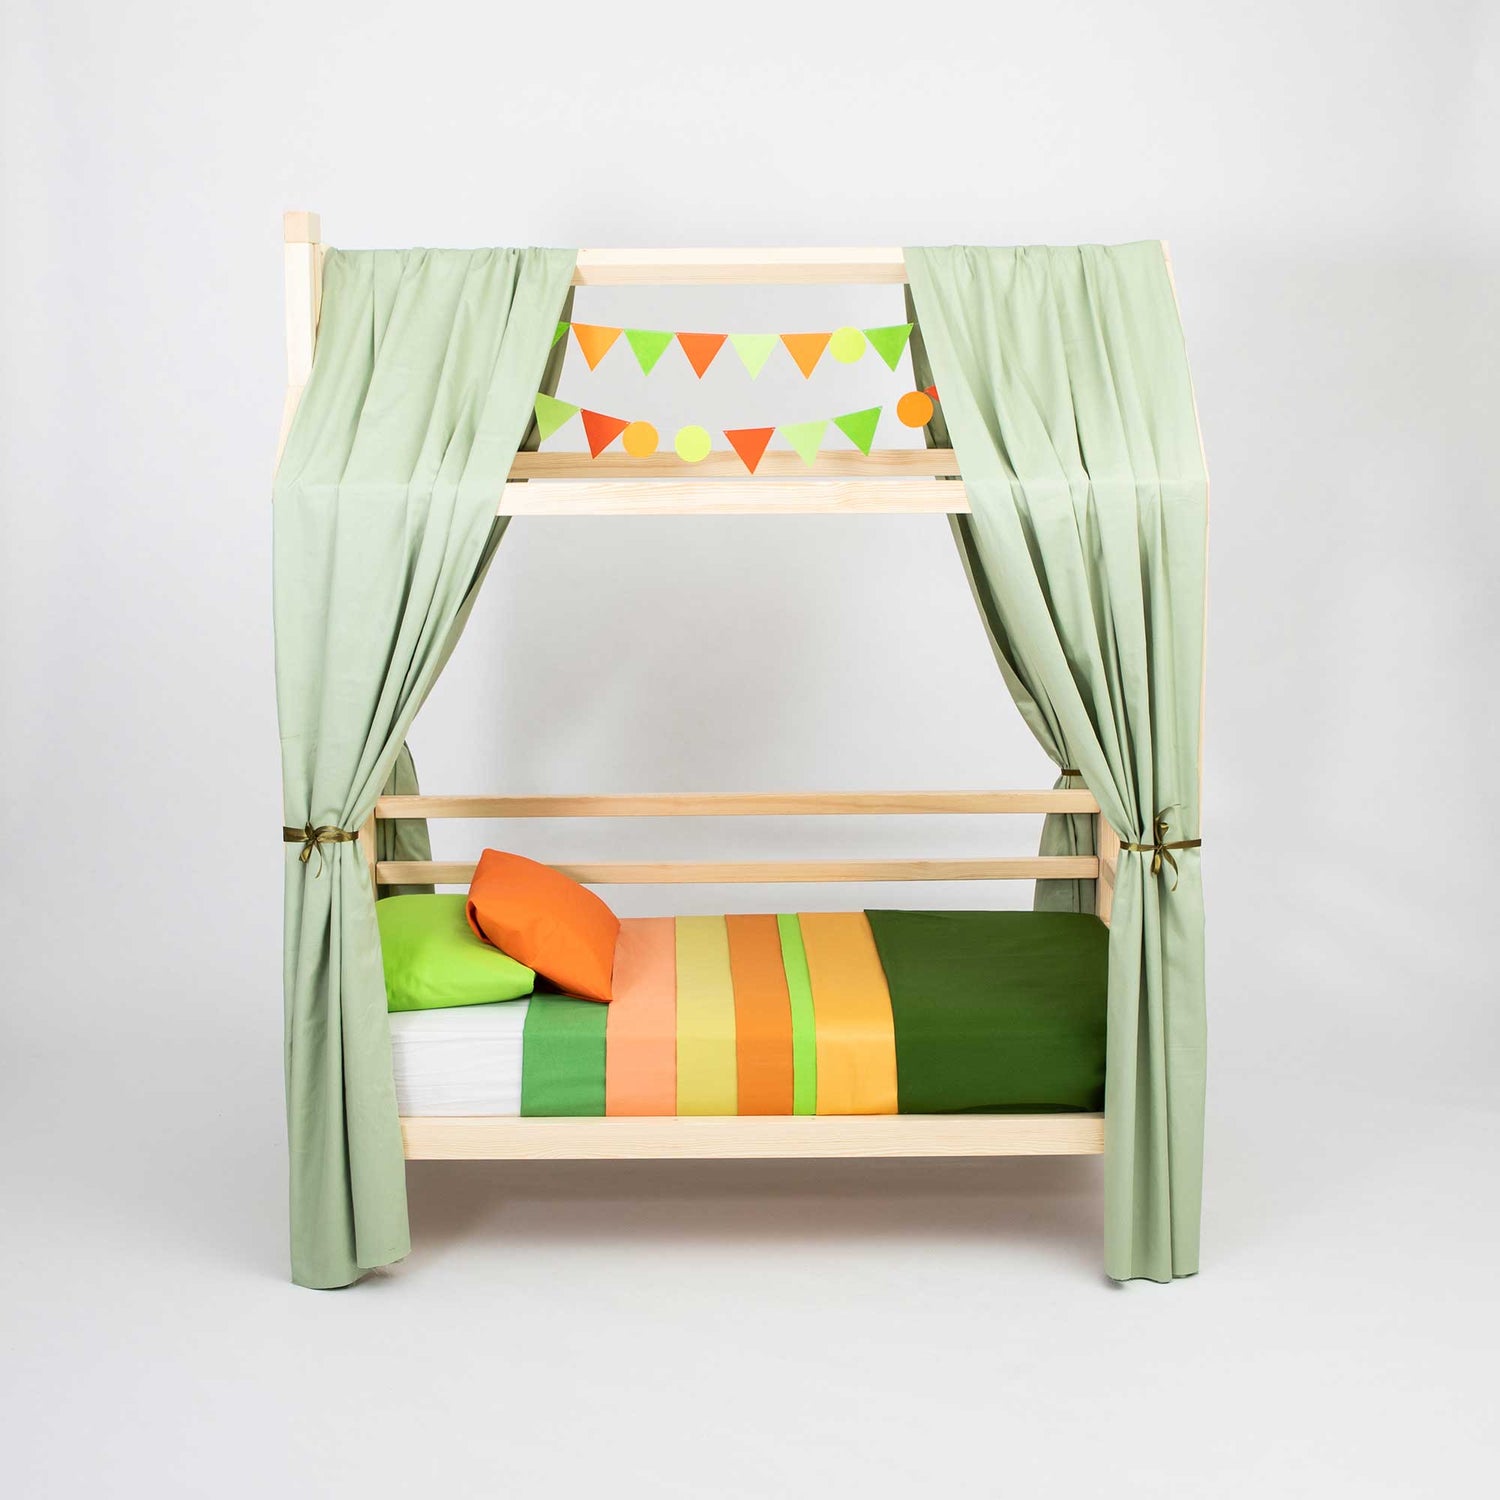 A green bunk bed with colorful curtains.